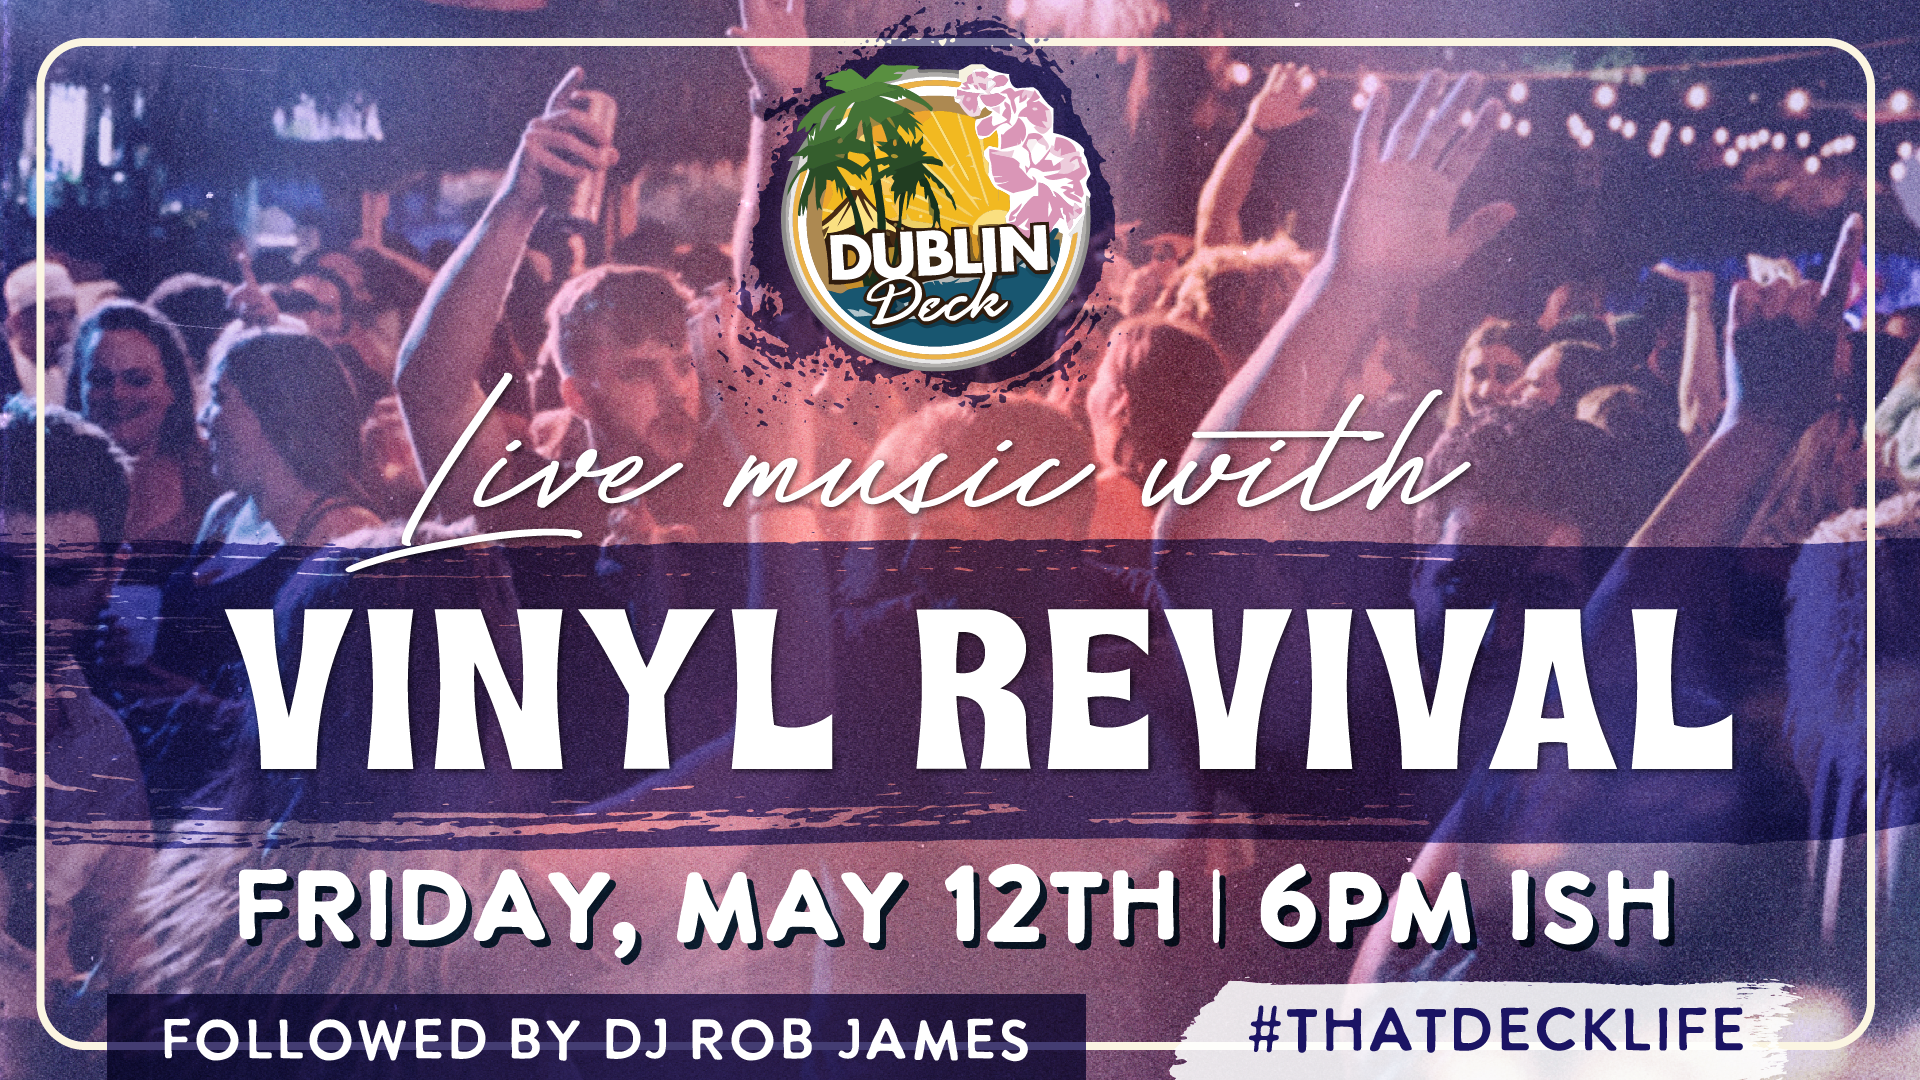 Get the weekend started with Vinyl Revival at Dublin Deck! Music starts at 6PM-ish